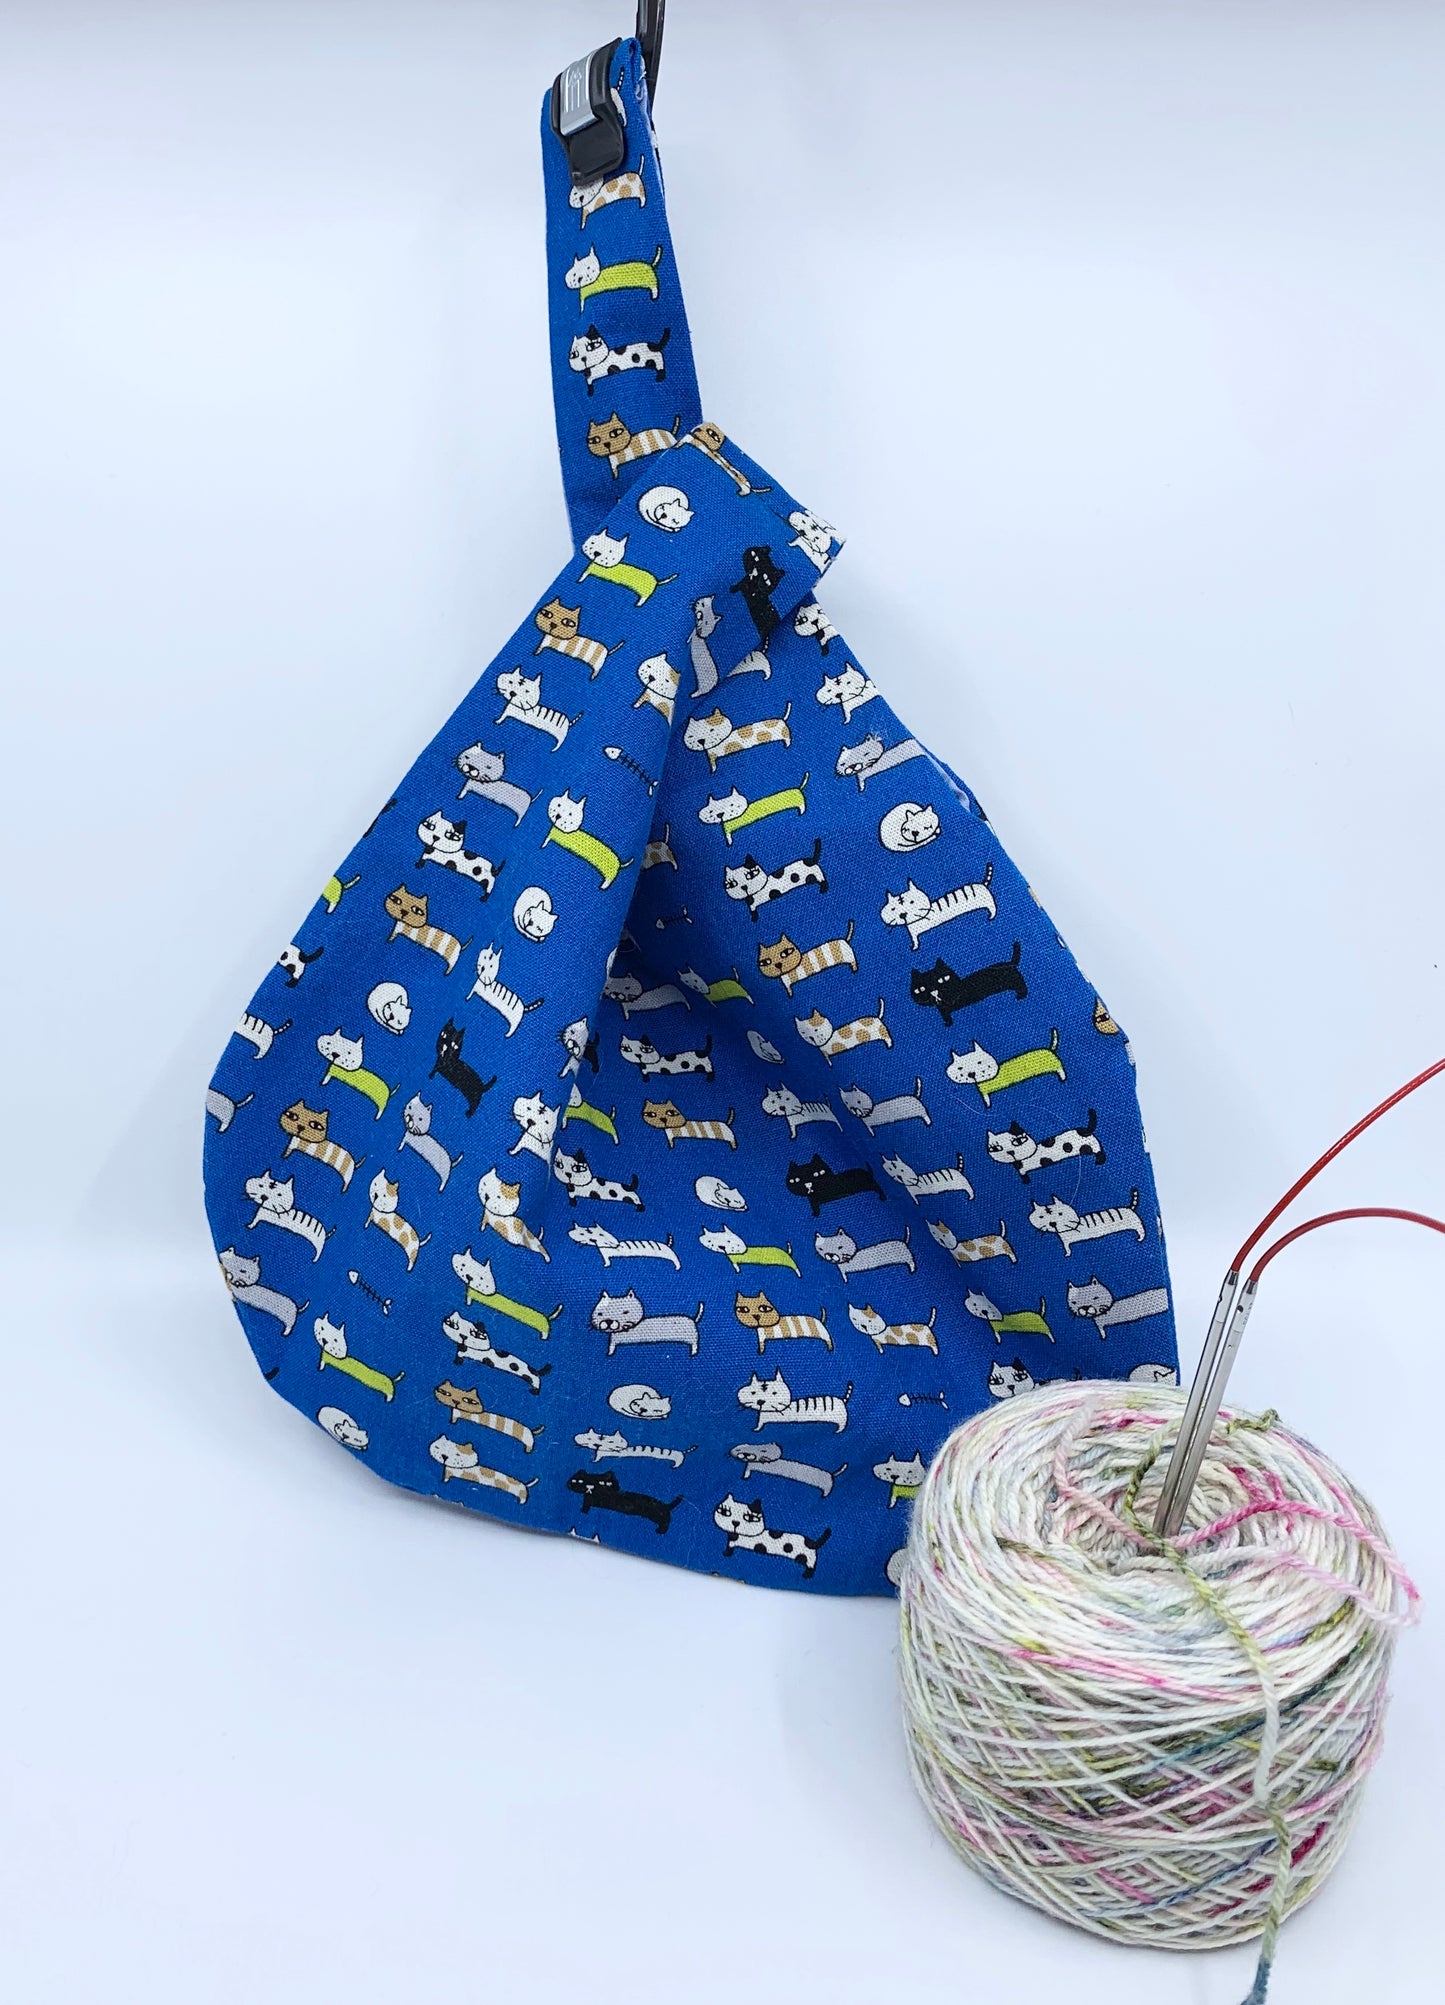 Knot Bag | Lined up Cats on Blue